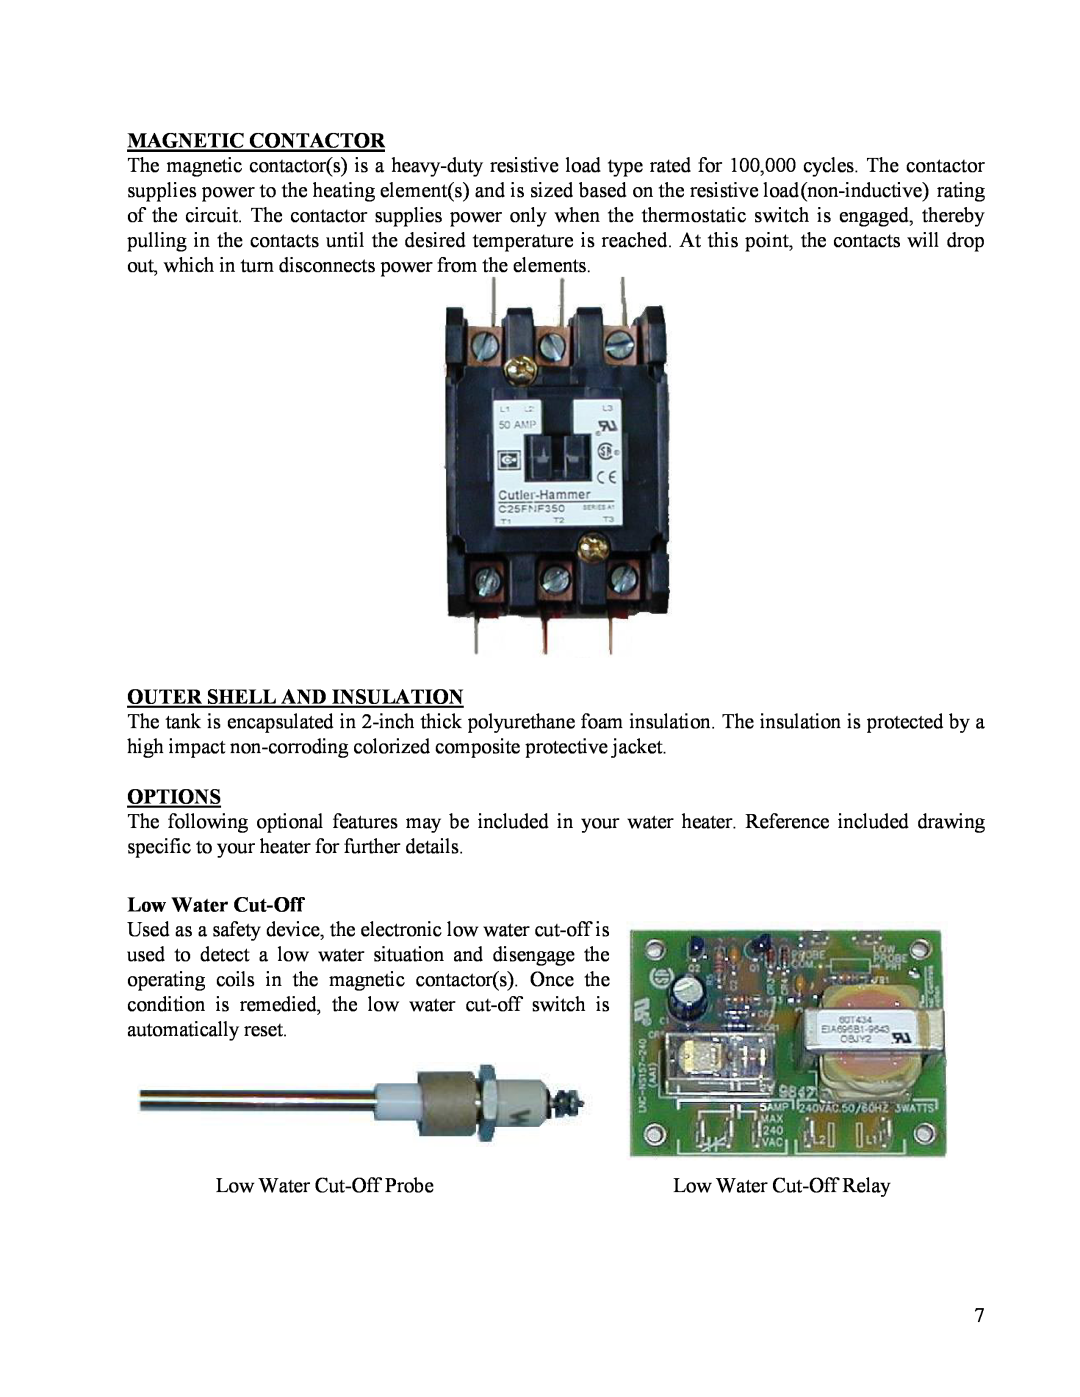 Hubbell Electric Heater Company MSE manual Magnetic Contactor, Outer Shell And Insulation, Options, Low Water Cut-Off 